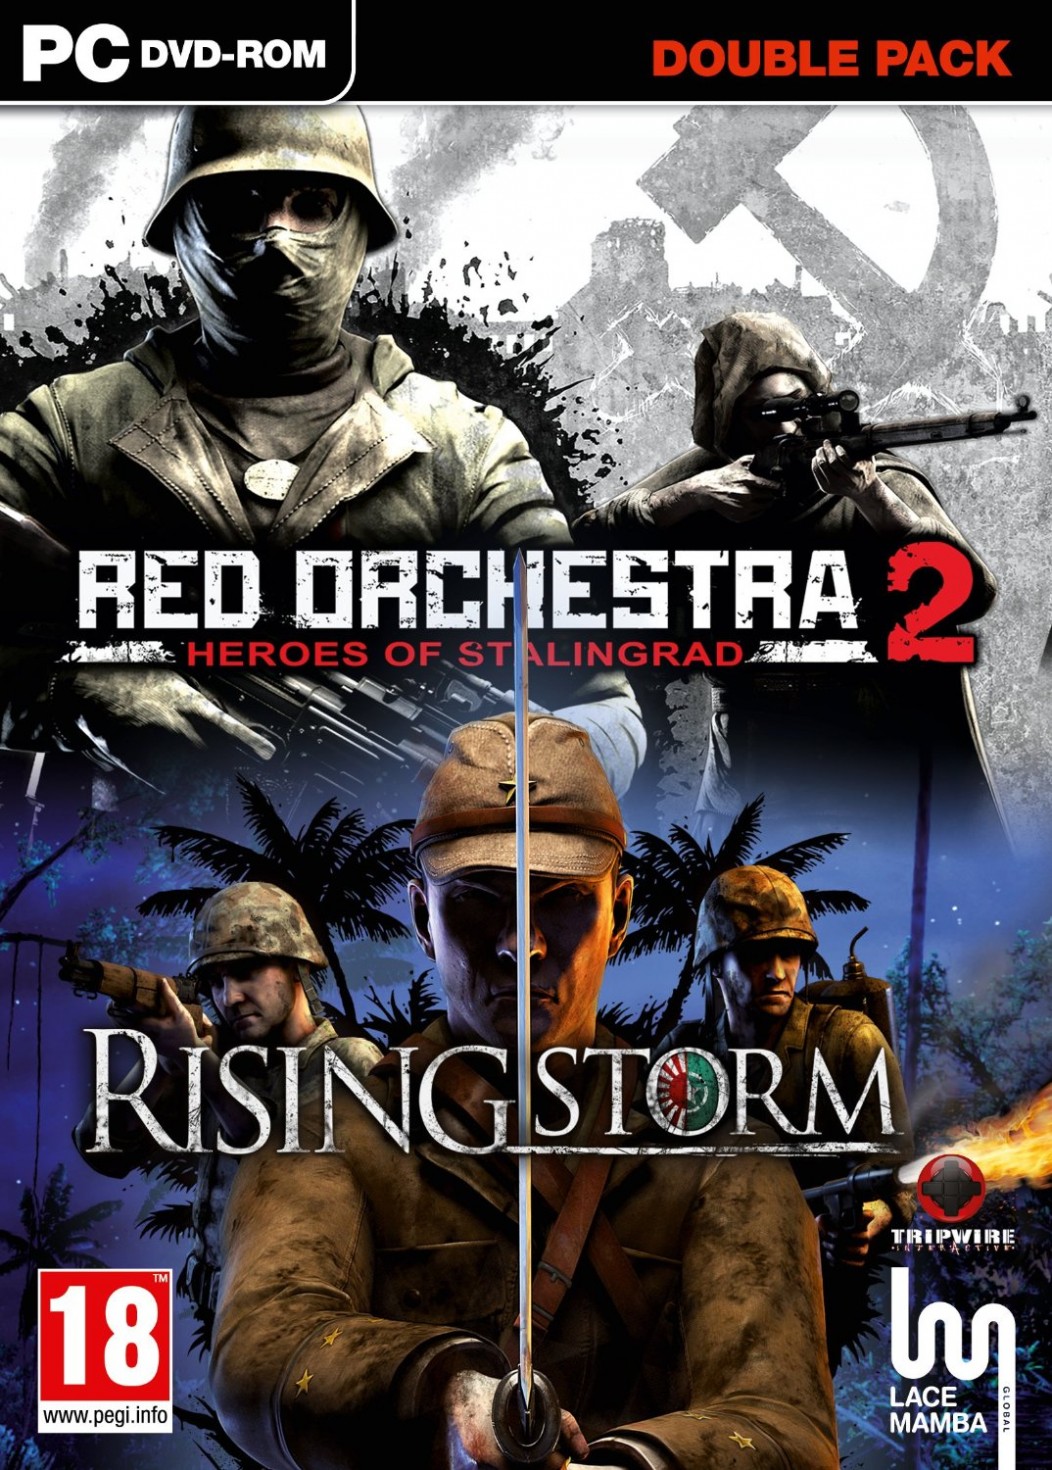 Red Orchestra 2 Free Download